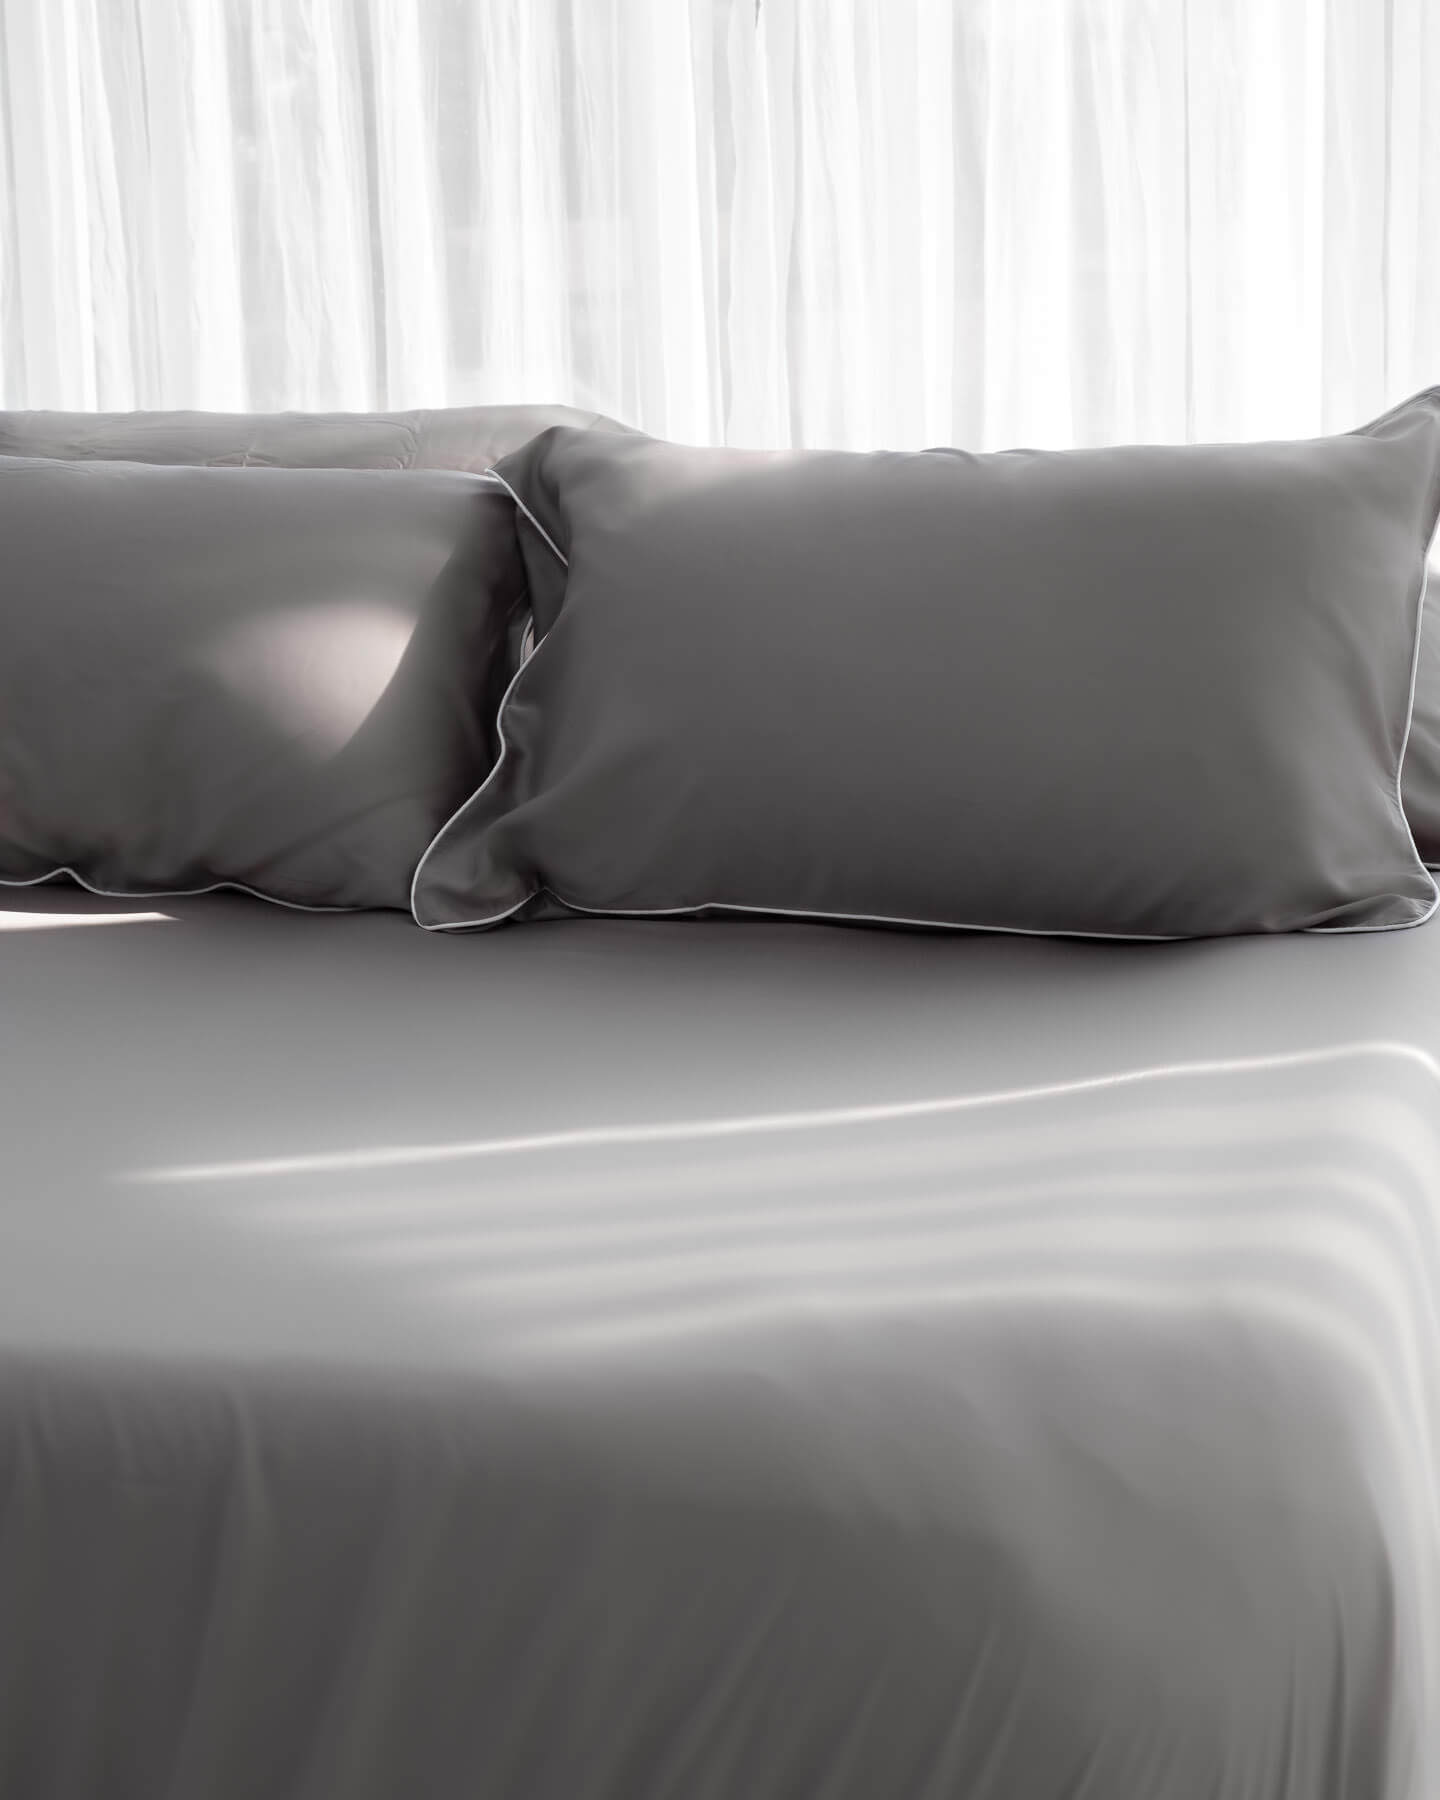 ava and ava ph organic bamboo lyocell sheet set (2 pillowcases 1 fitted sheet) in urban oasis (gray with white piping). ava and ava ph soft, cooling, breathable bed sheets.